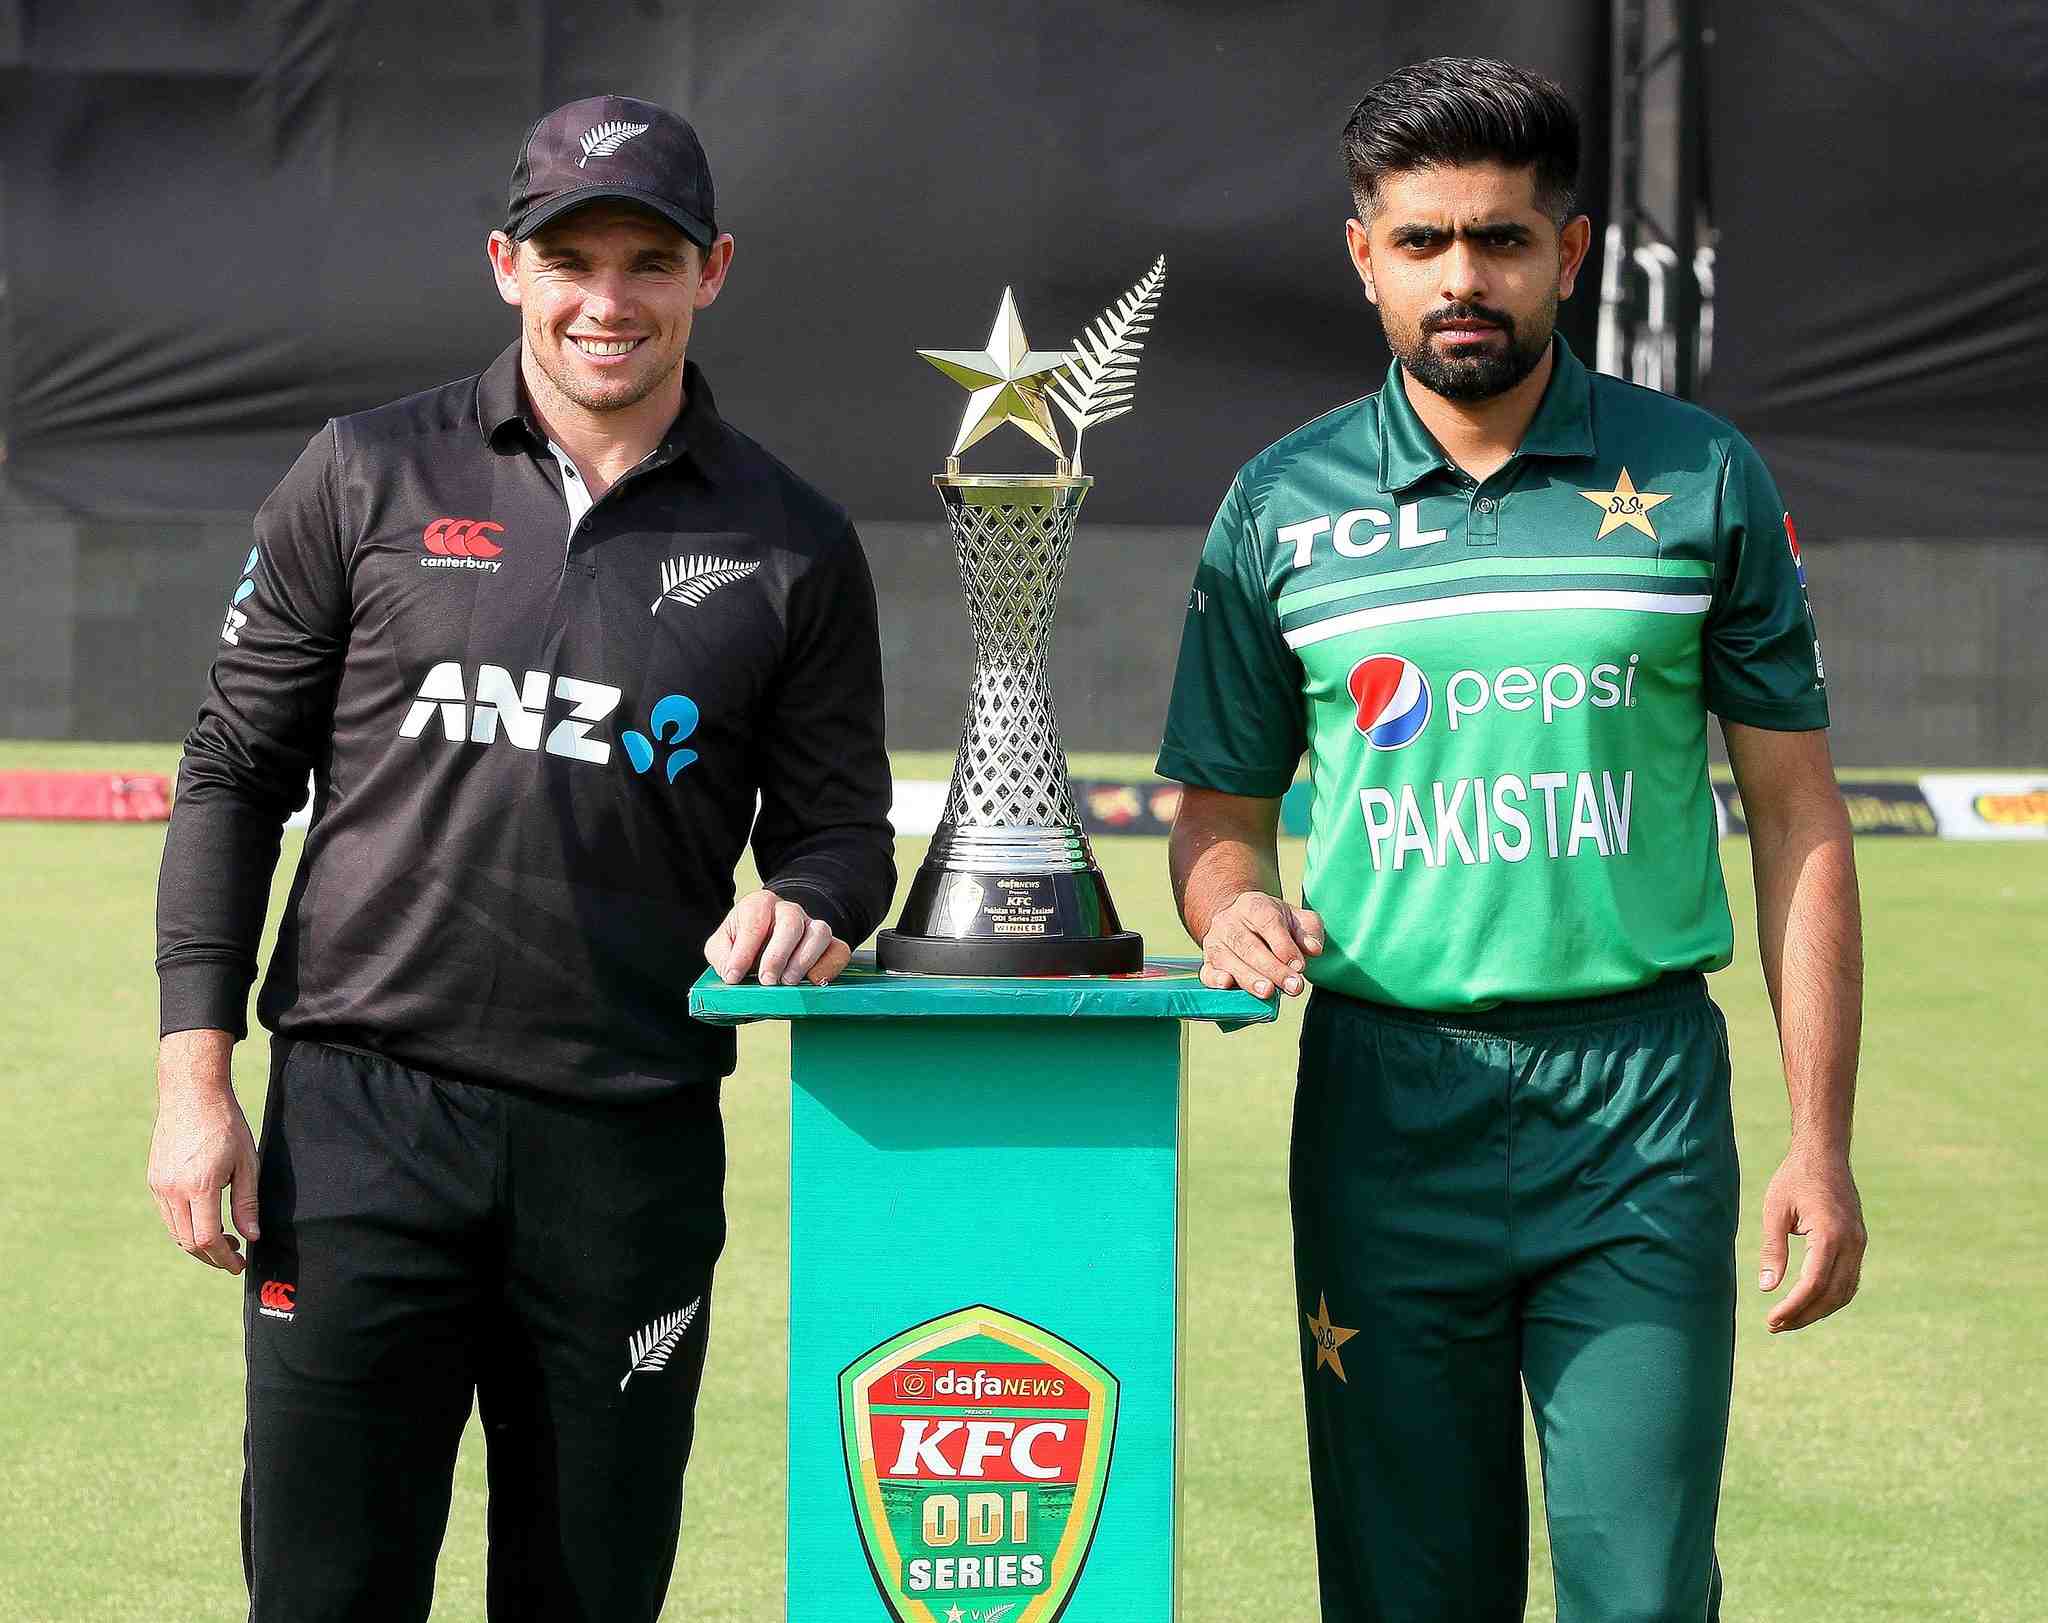 Cricket News: Pakistan launches World Cup preparations campaign on Thursday